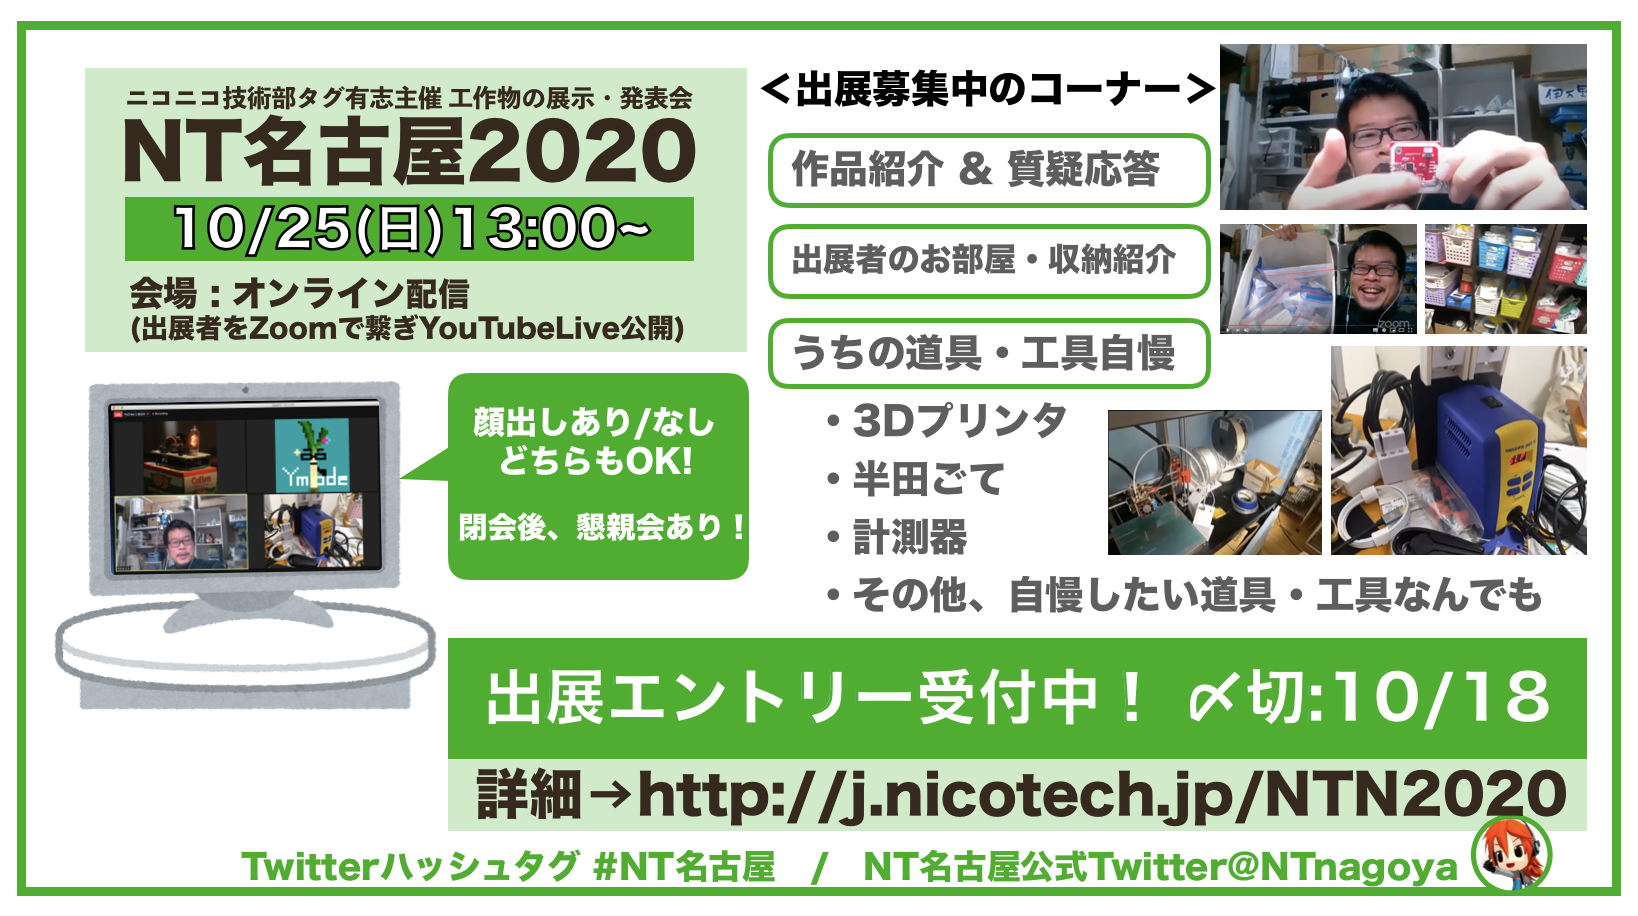 NT名古屋2020_道具工具自慢.png